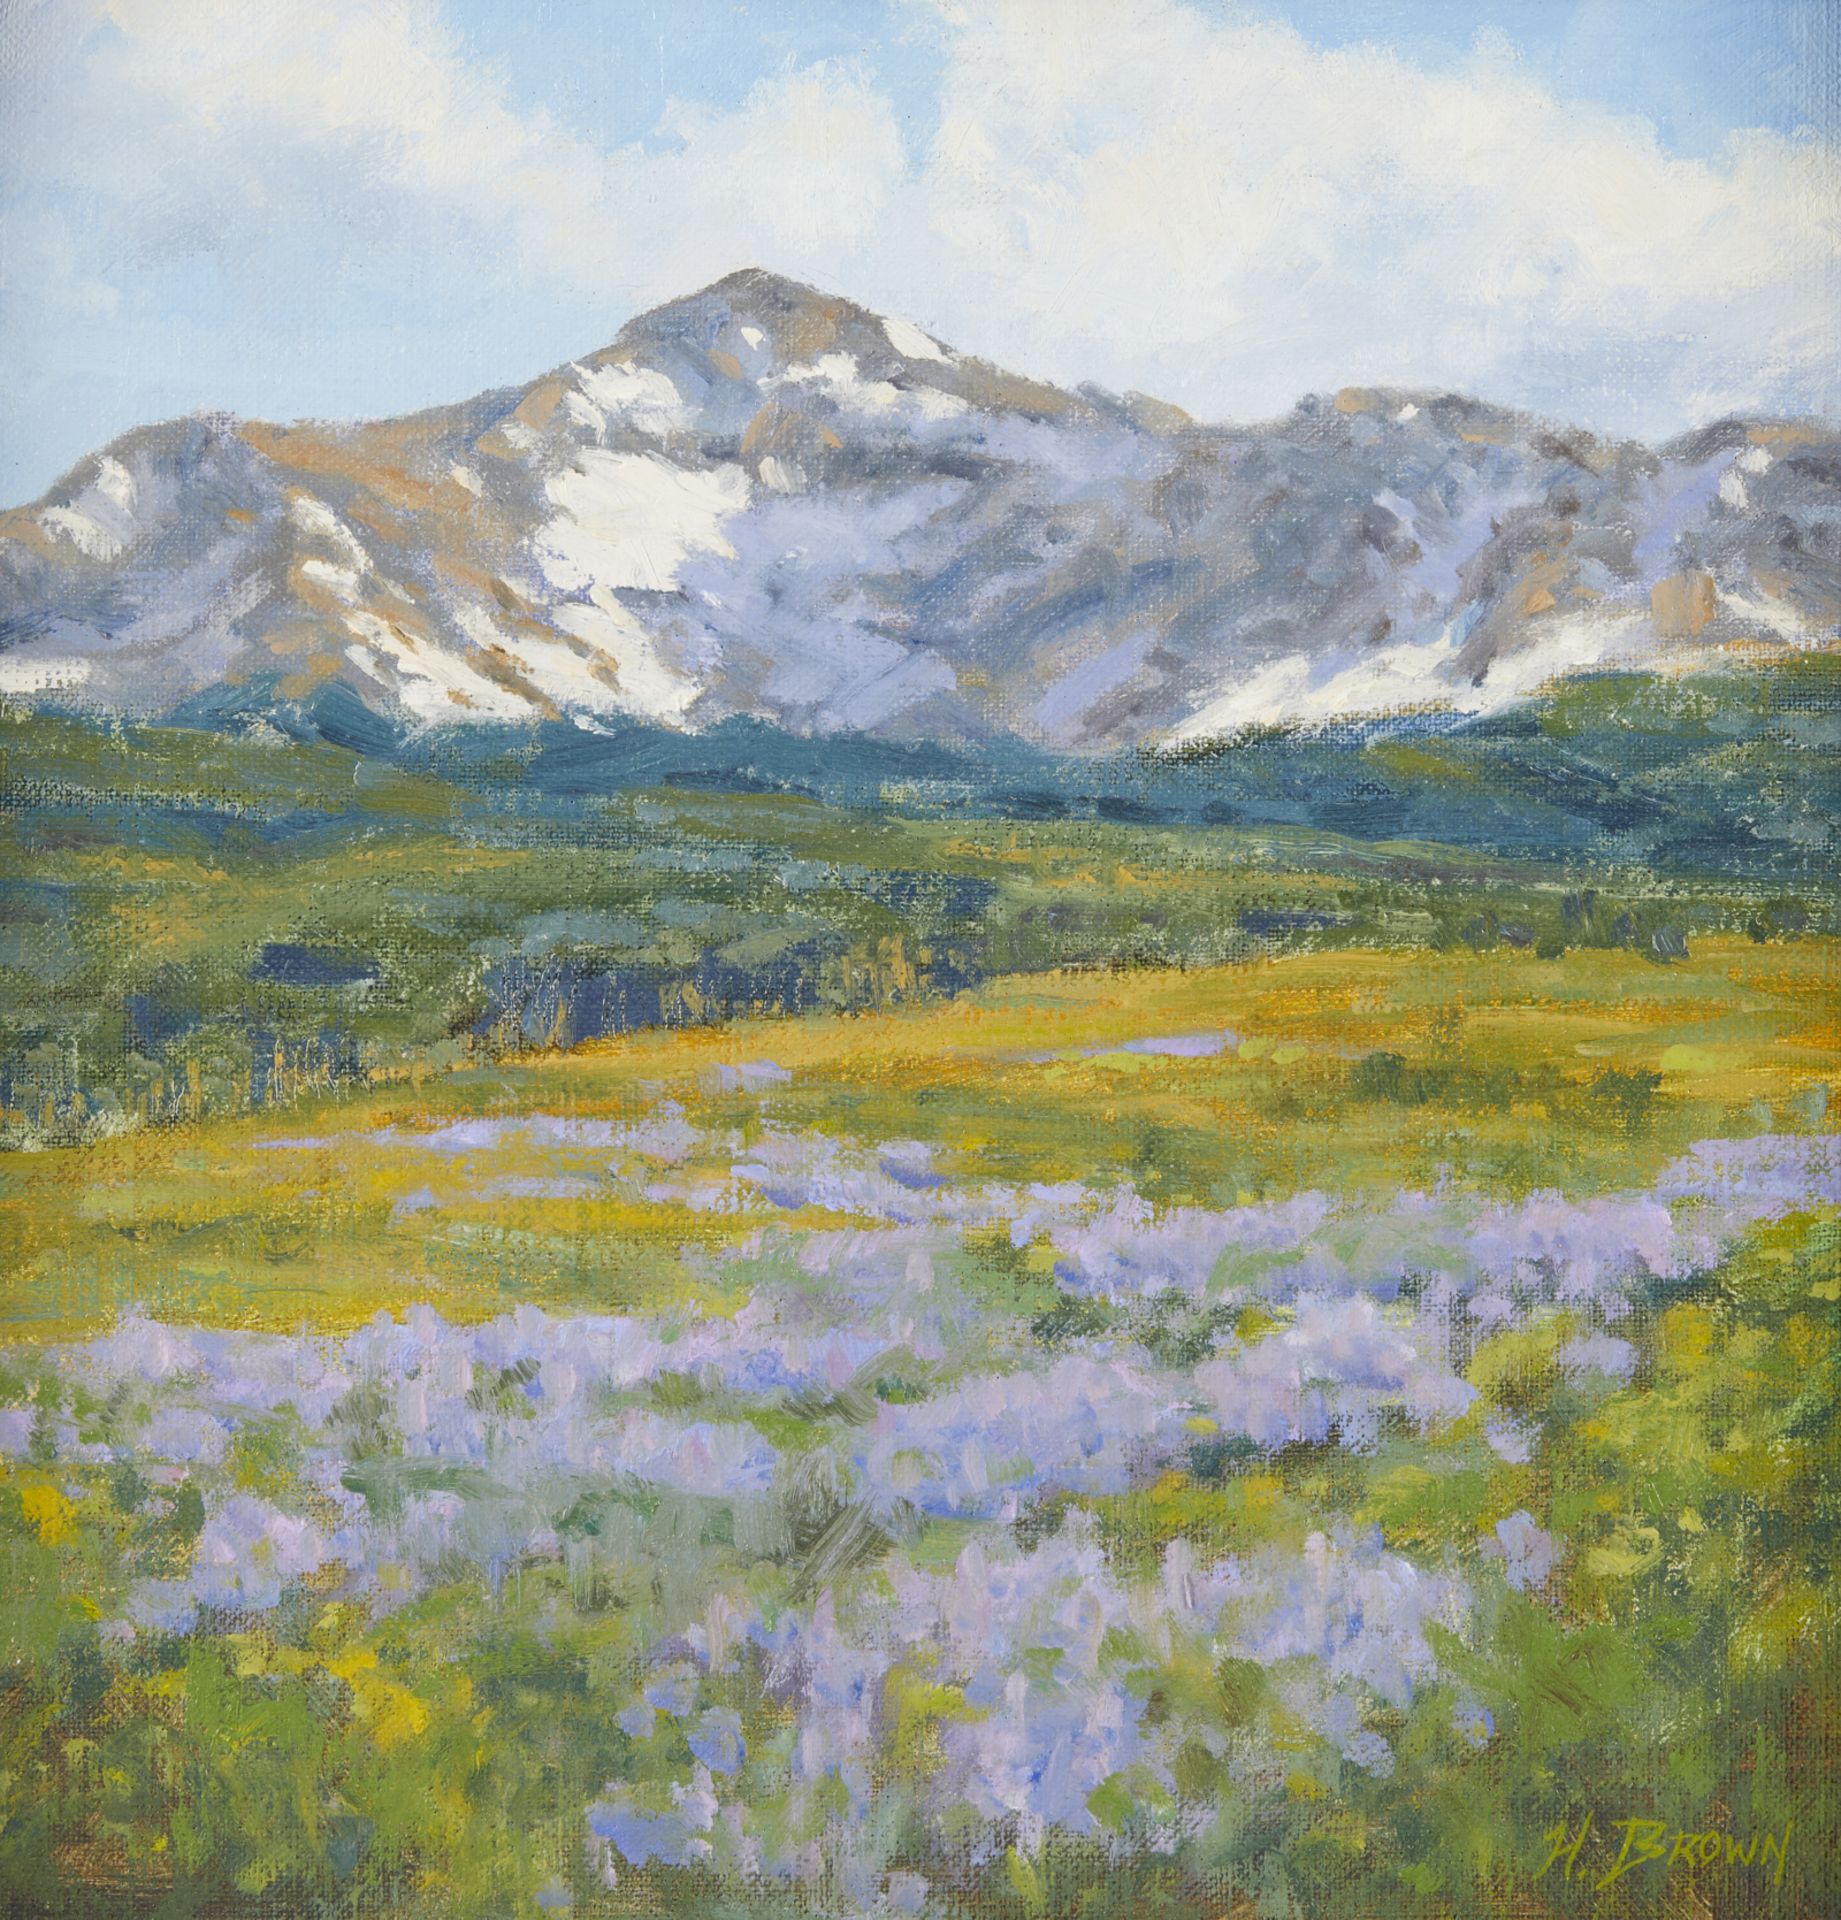 Howard V. Brown Rocky Mountain Landscape Painting